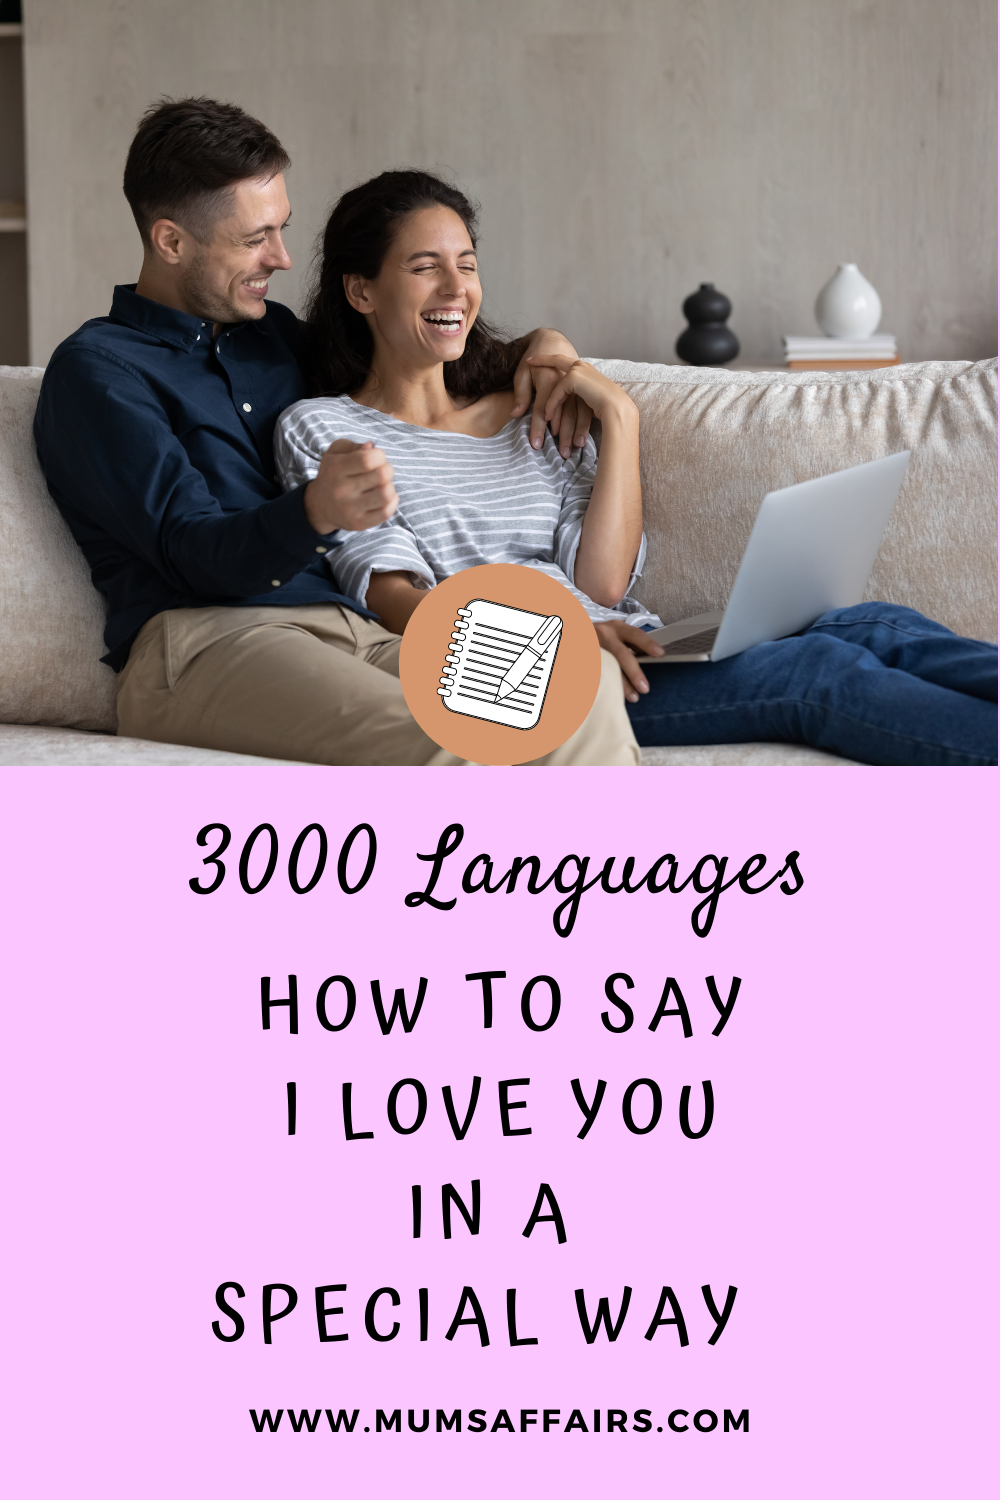 How to say I love you in 3000 languages